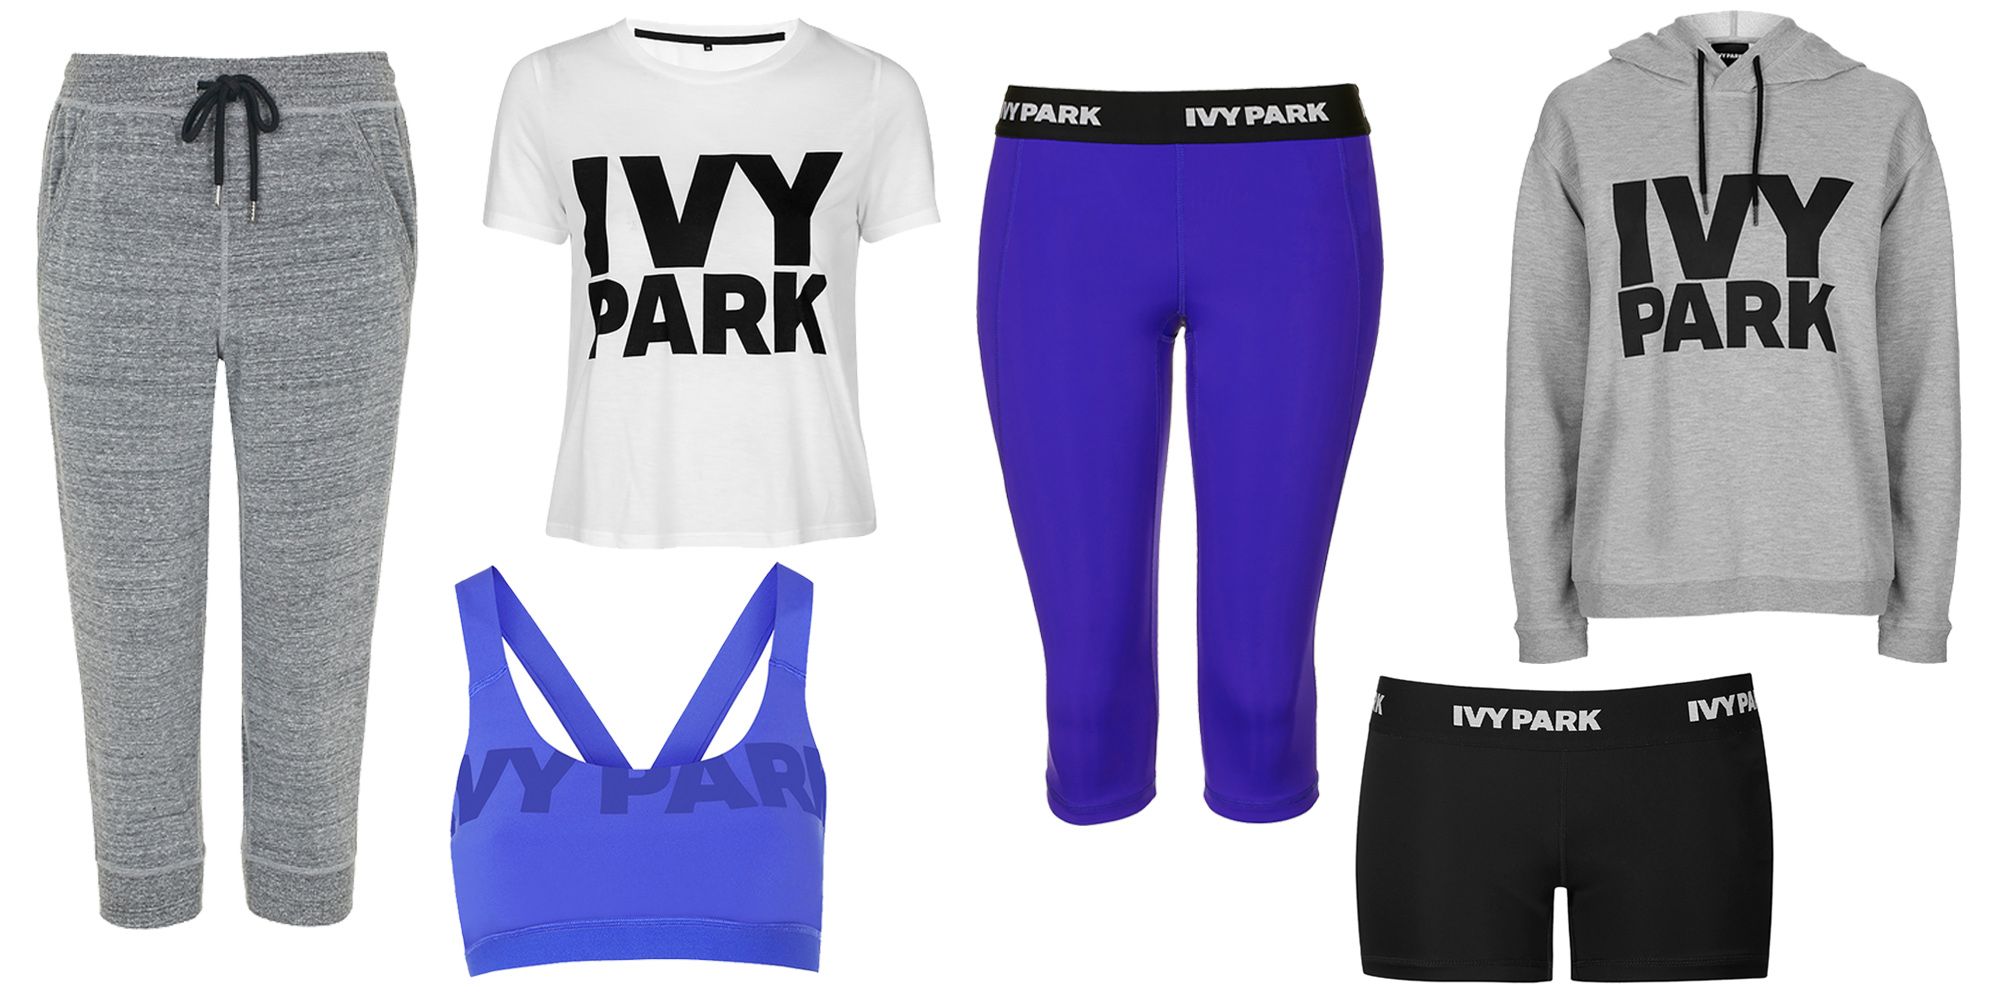 ivy park clothing for sale